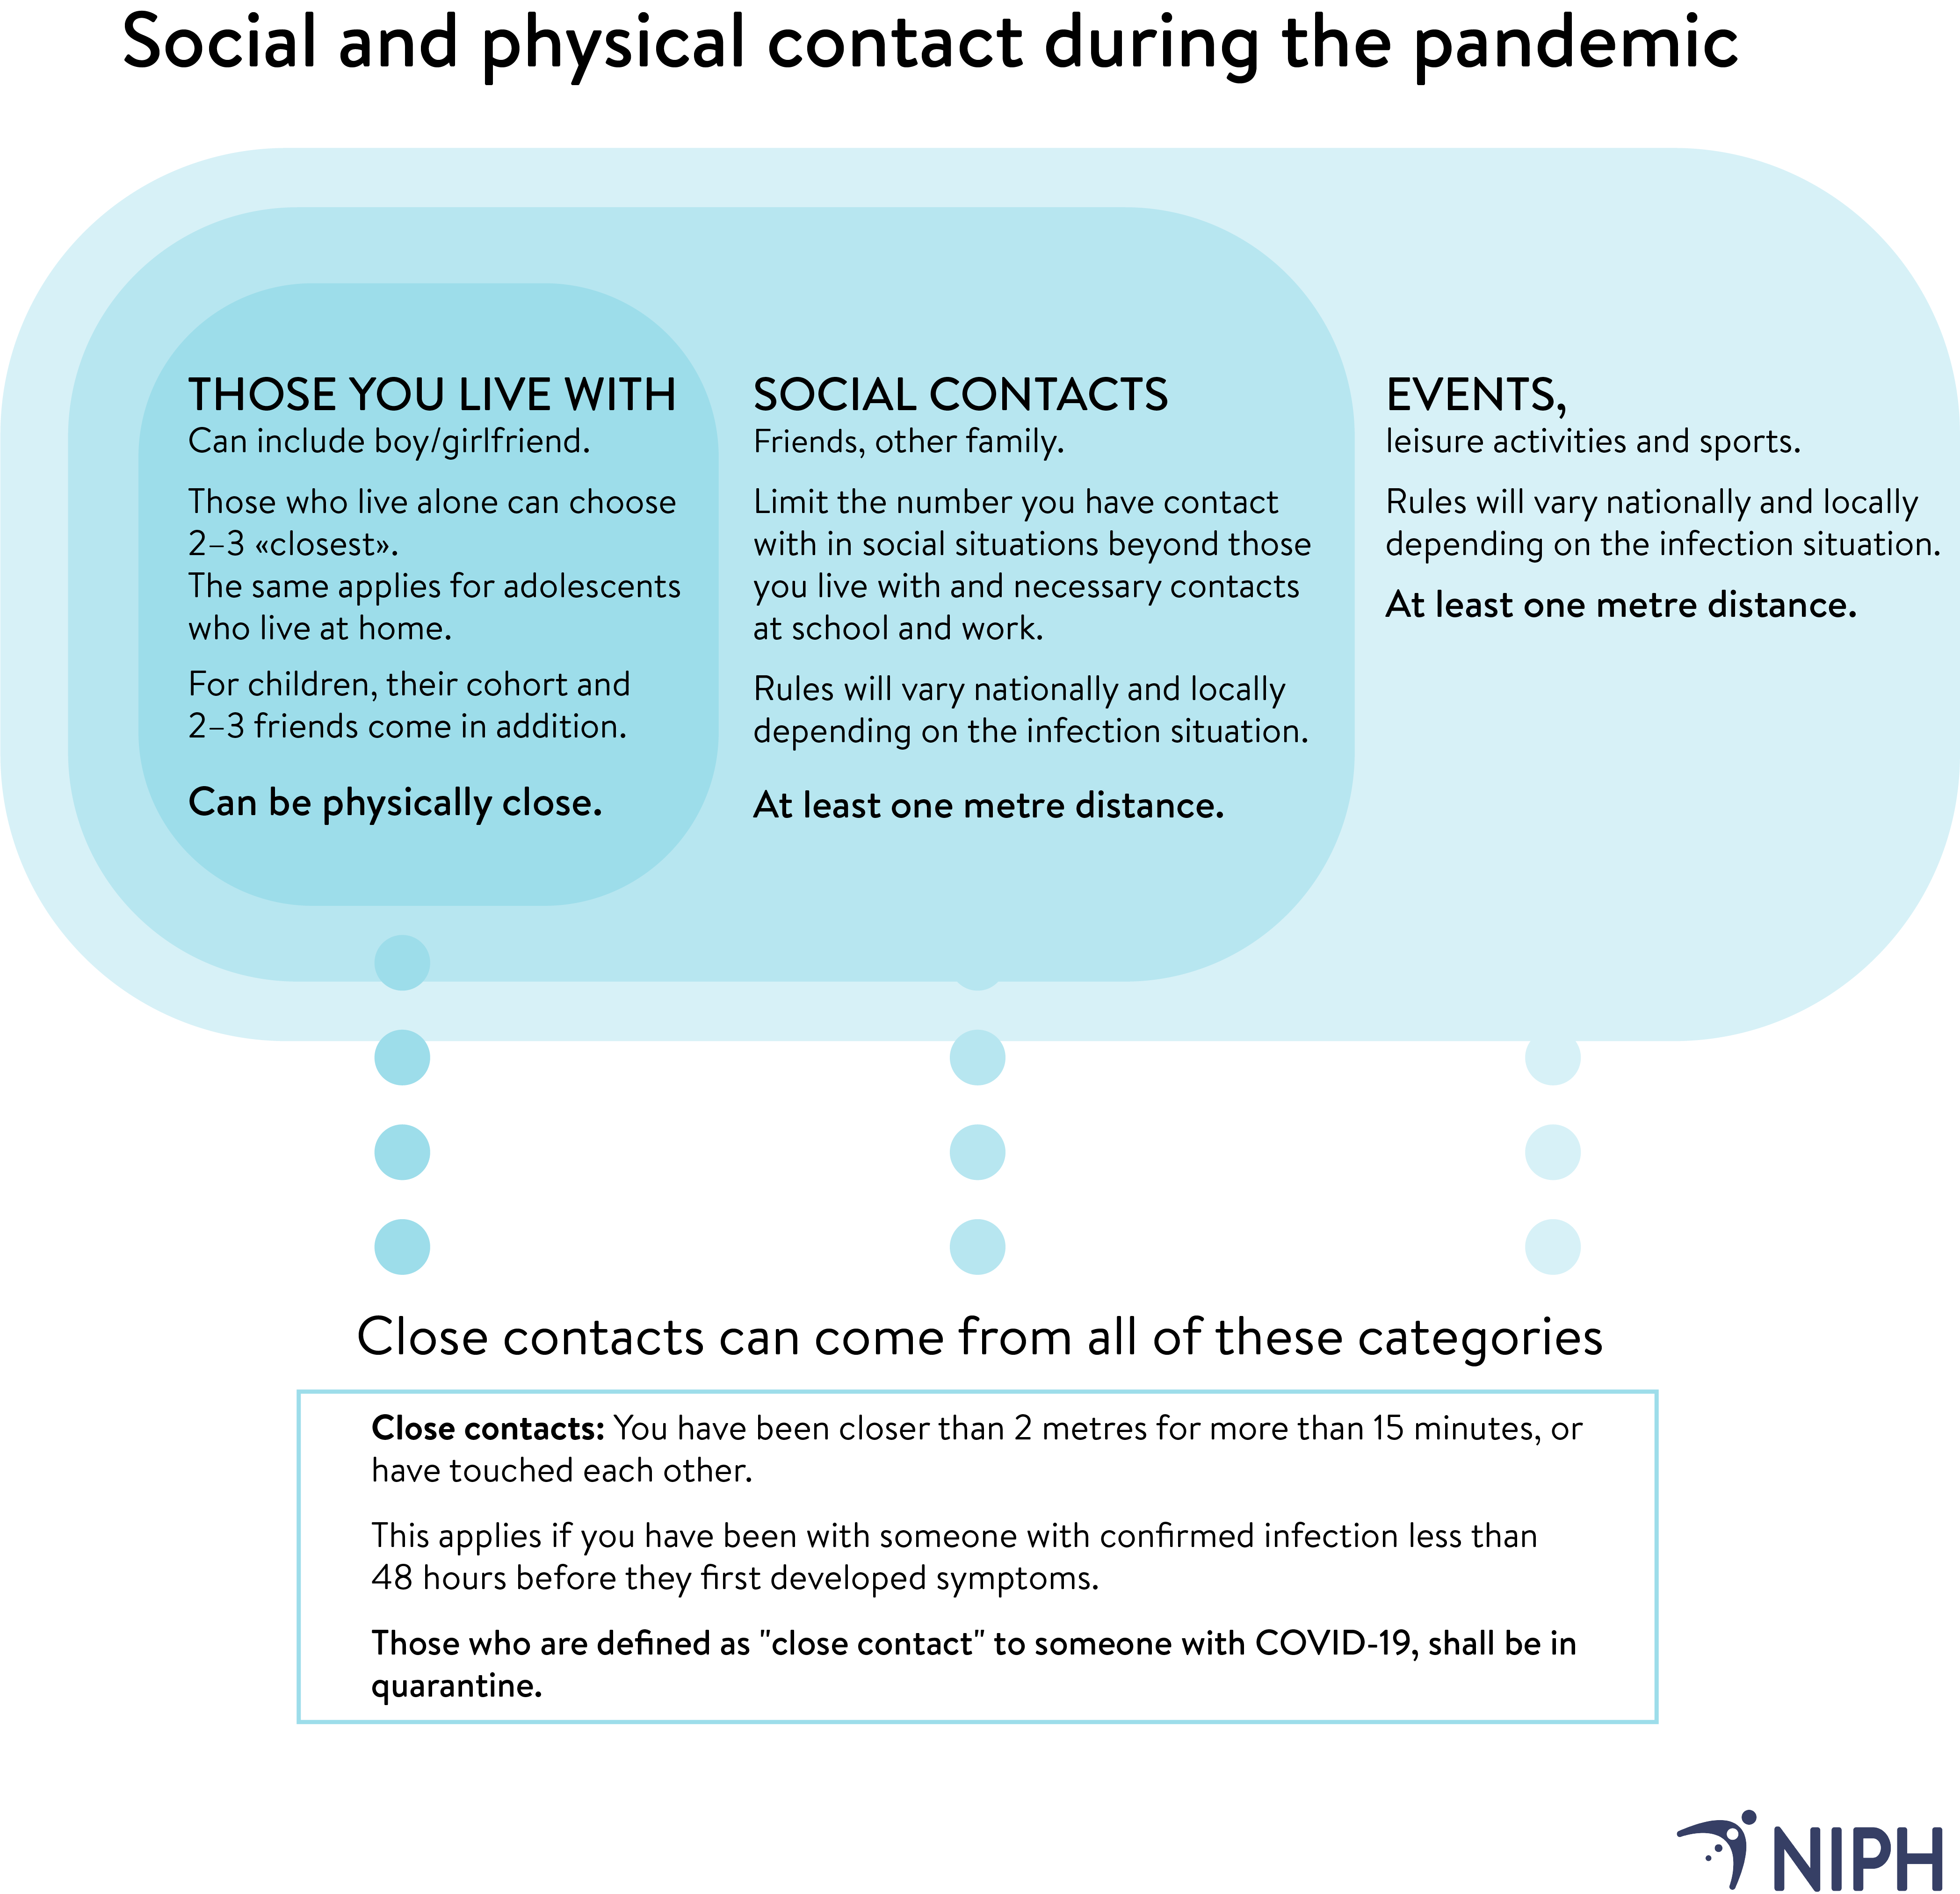 Social and physical contact during the pandemic